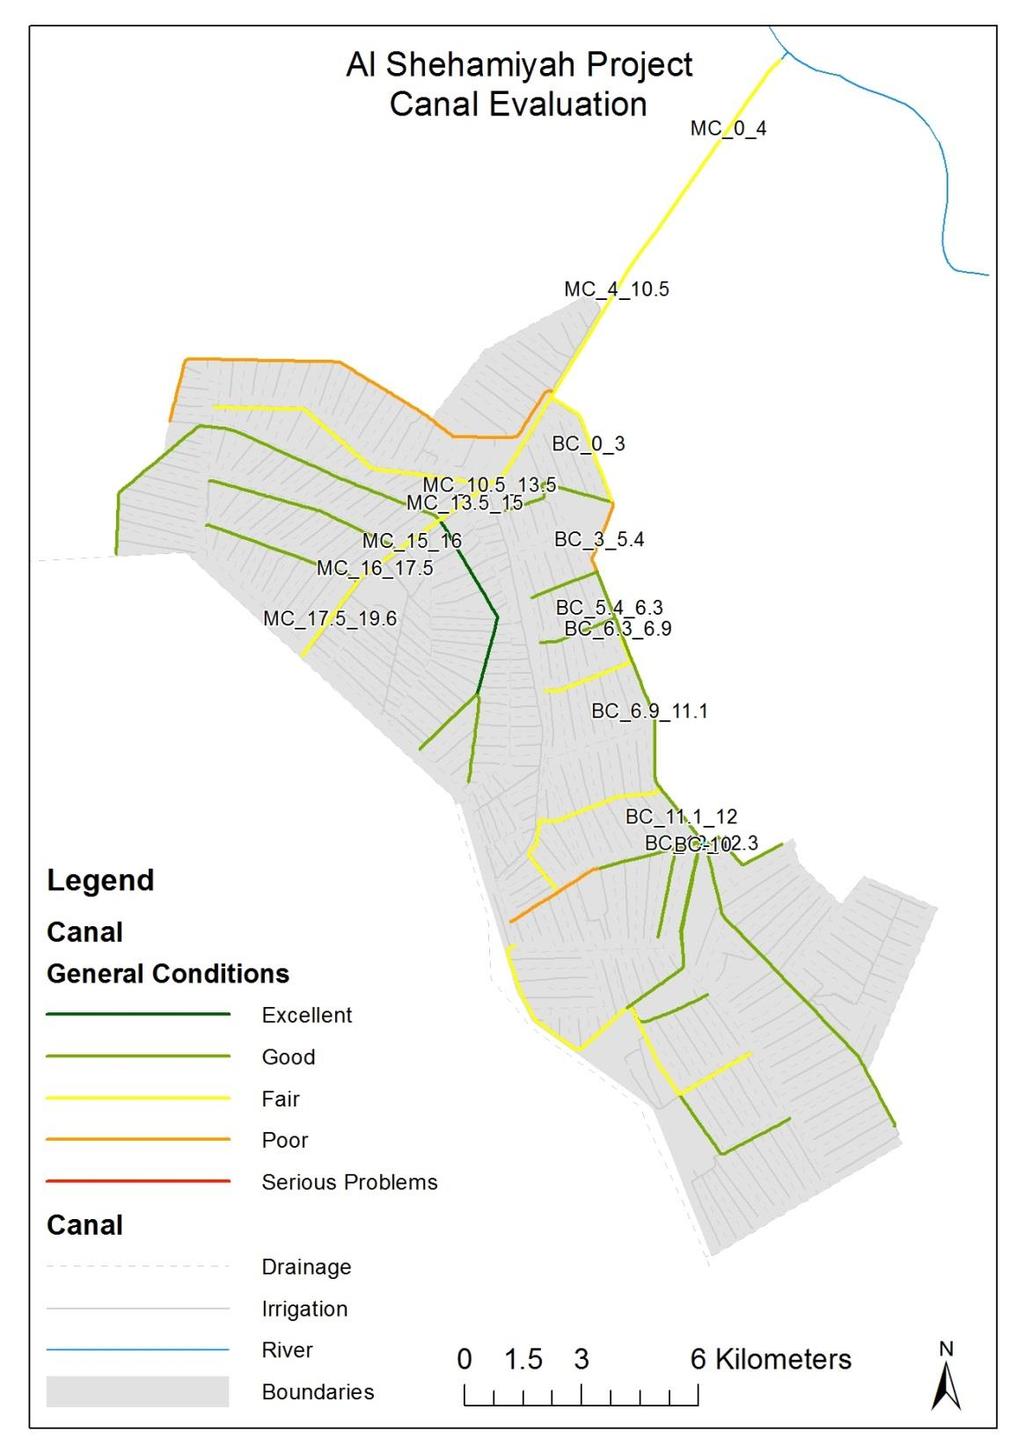 Canal Evaluation (Al Shehamiyah Project) General conditions (concrete